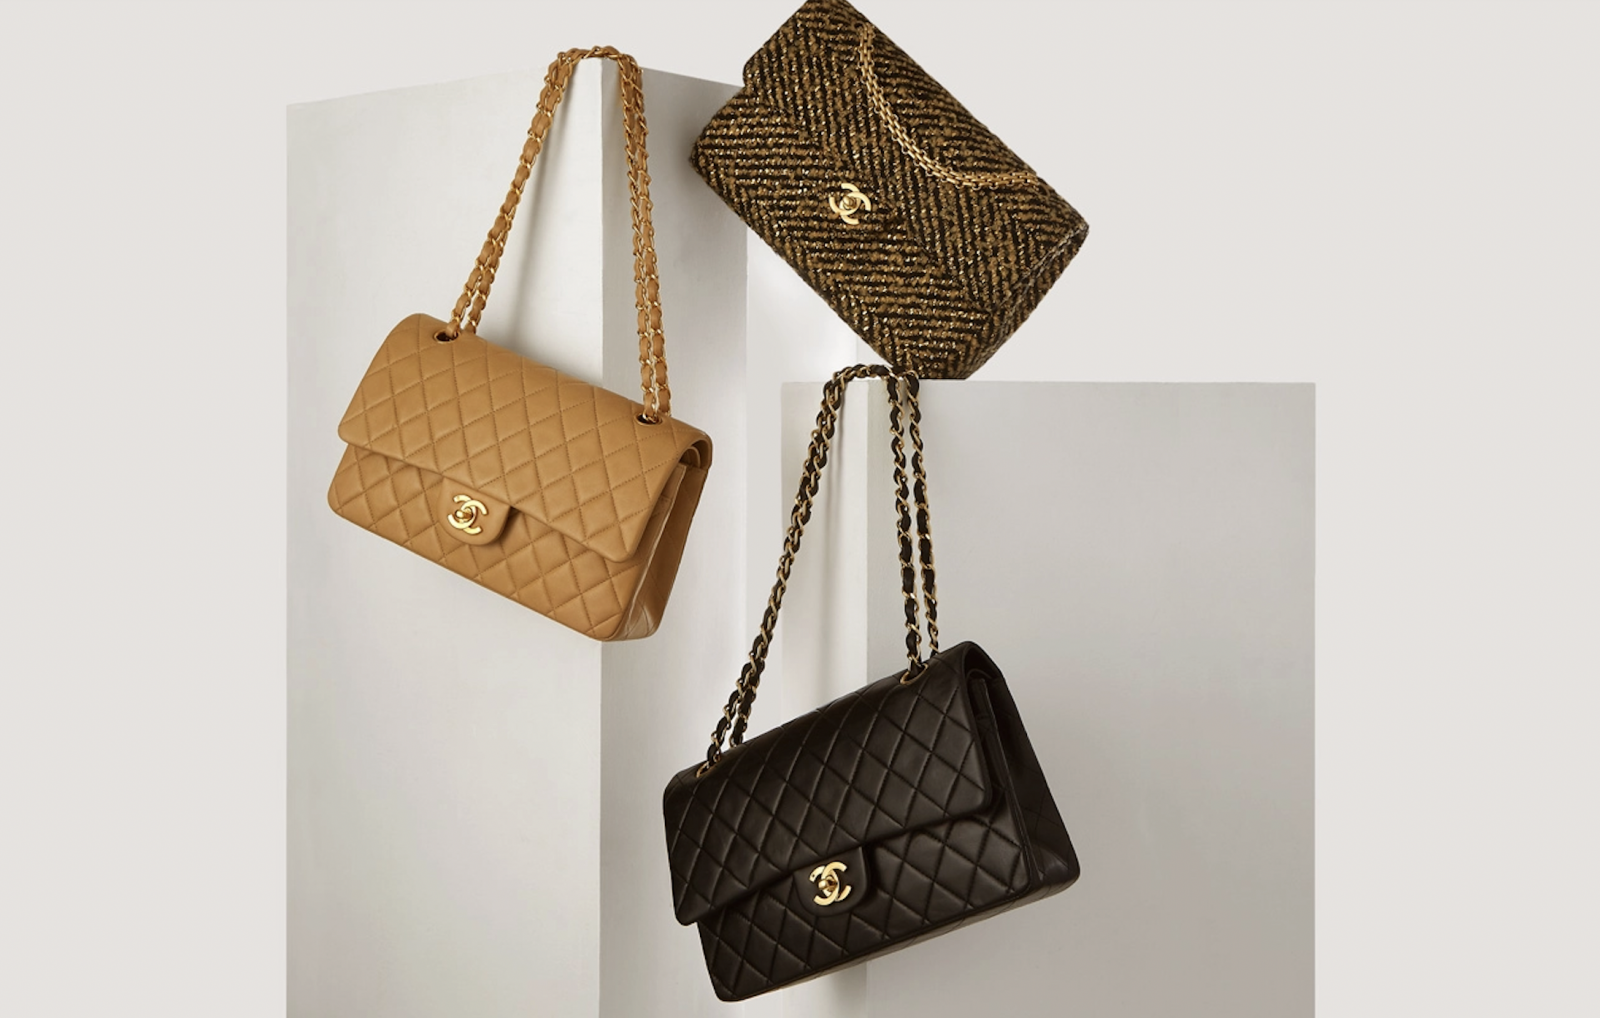 Chanel, Hermès Bags, Rolexes Make for Good Investments, Per Report